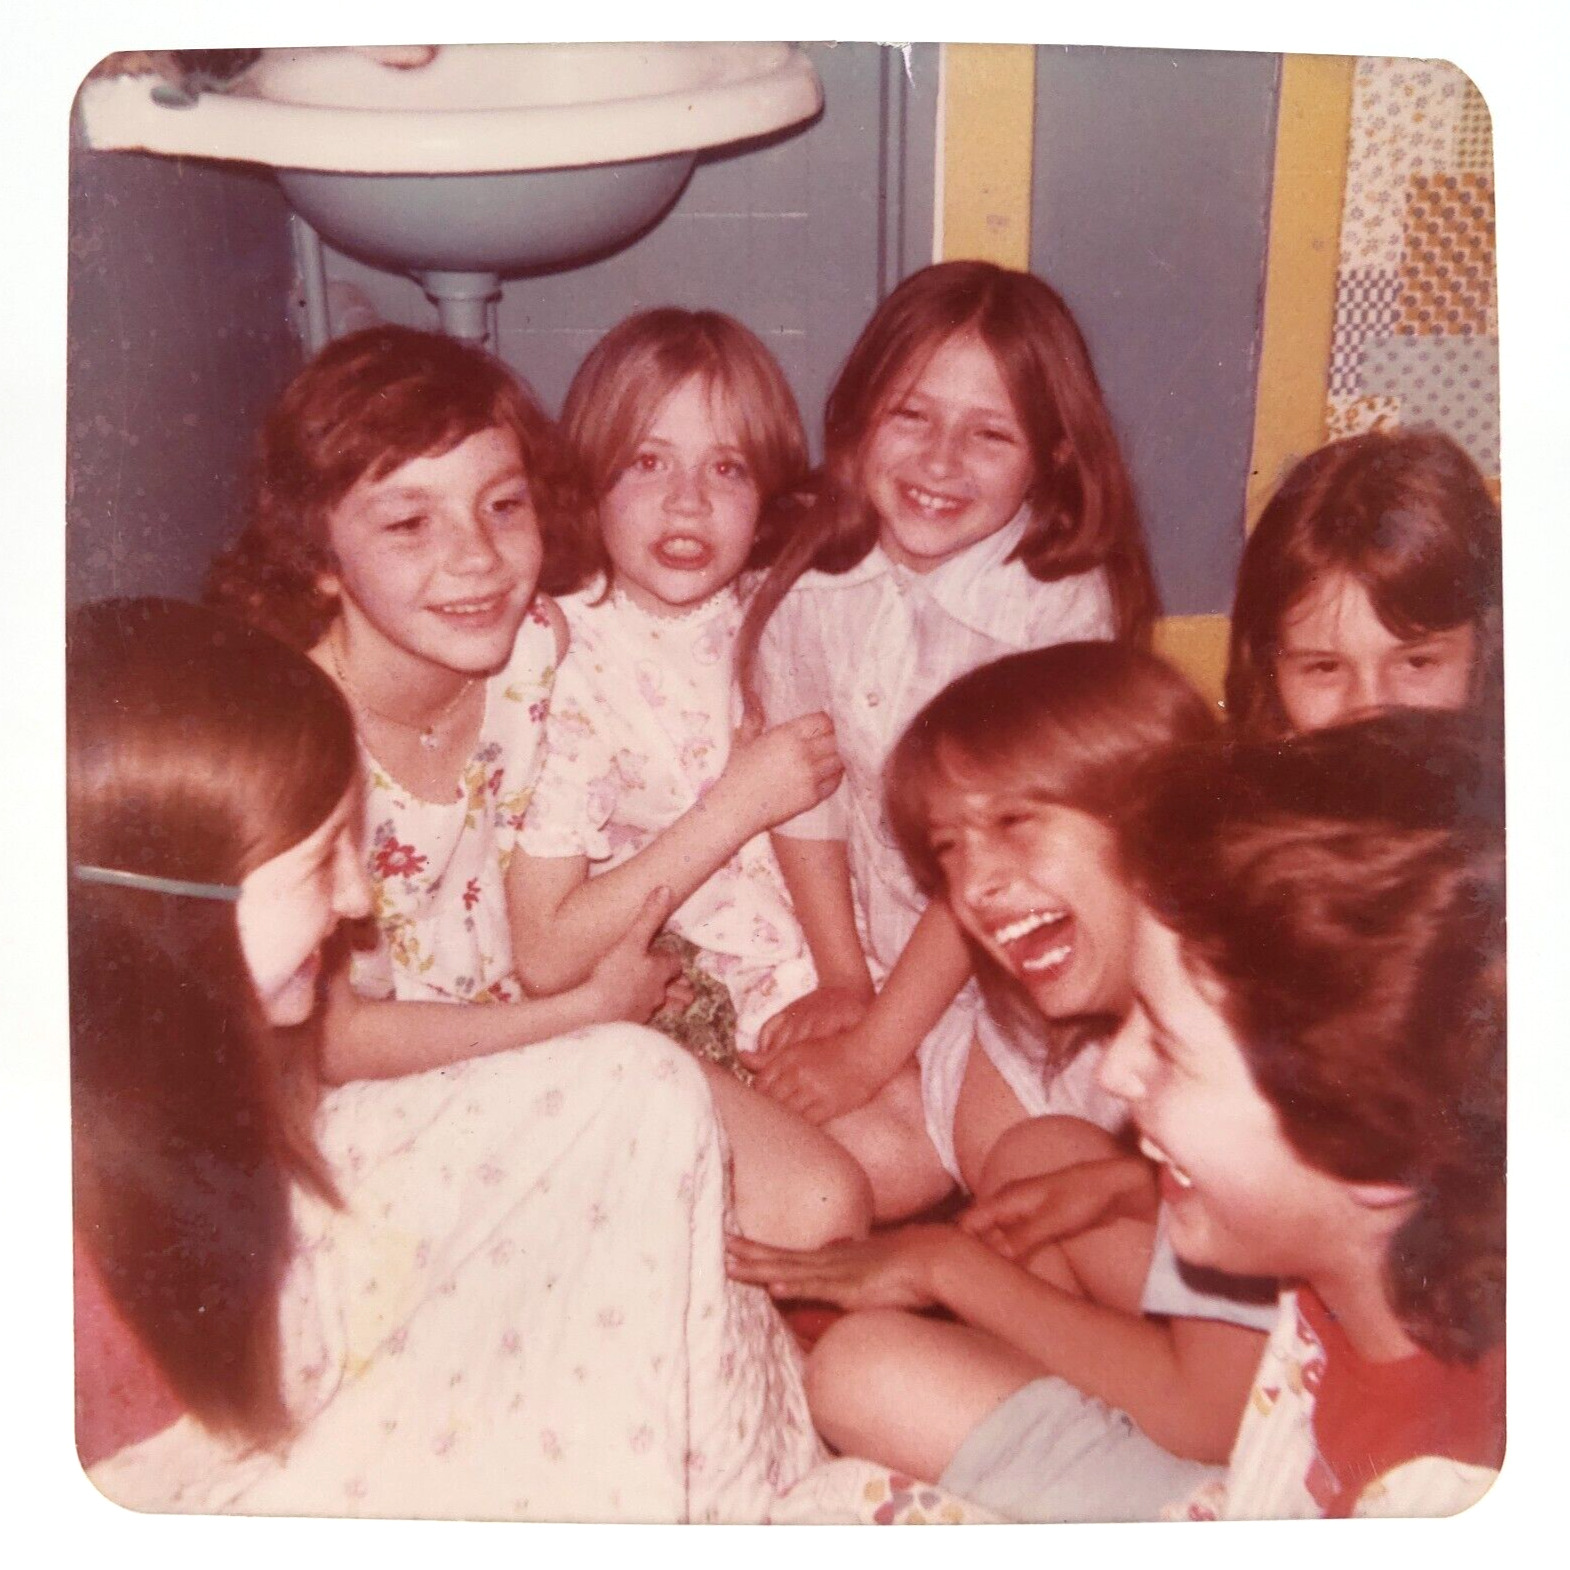 Girl Group Laughing Loud Photo 1970s Vintage Found Square Color Snapshot B3435